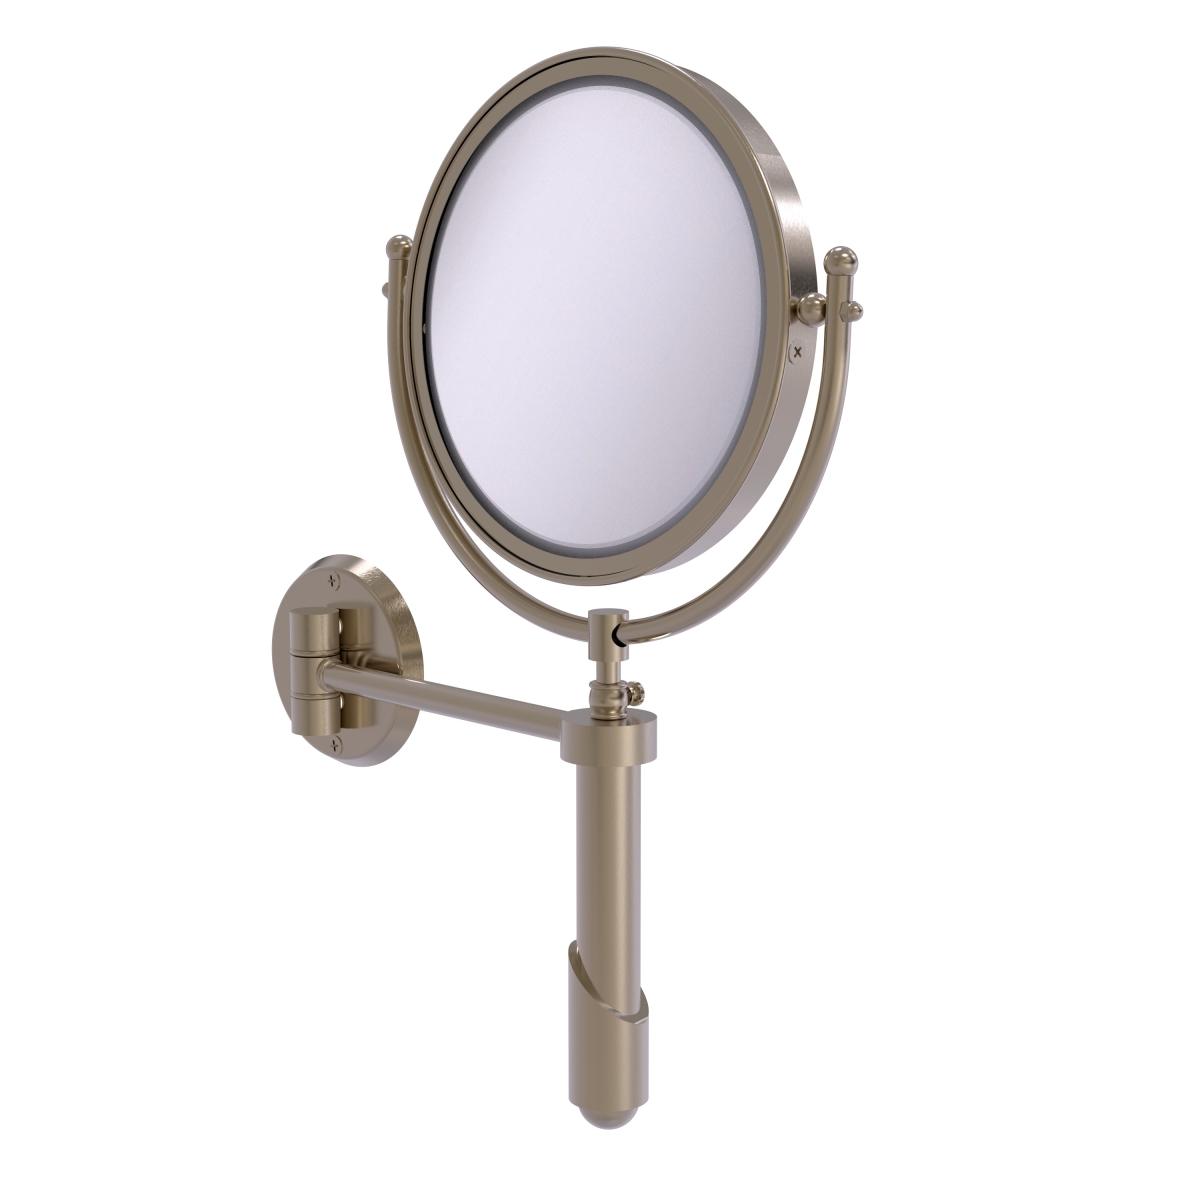 SHM-8-3X-PEW 8 in. dia. Soho Collection Wall Mounted Make-Up Mirror with 3X Magnification, Antique Pewter -  Allied Brass, SHM-8/3X-PEW